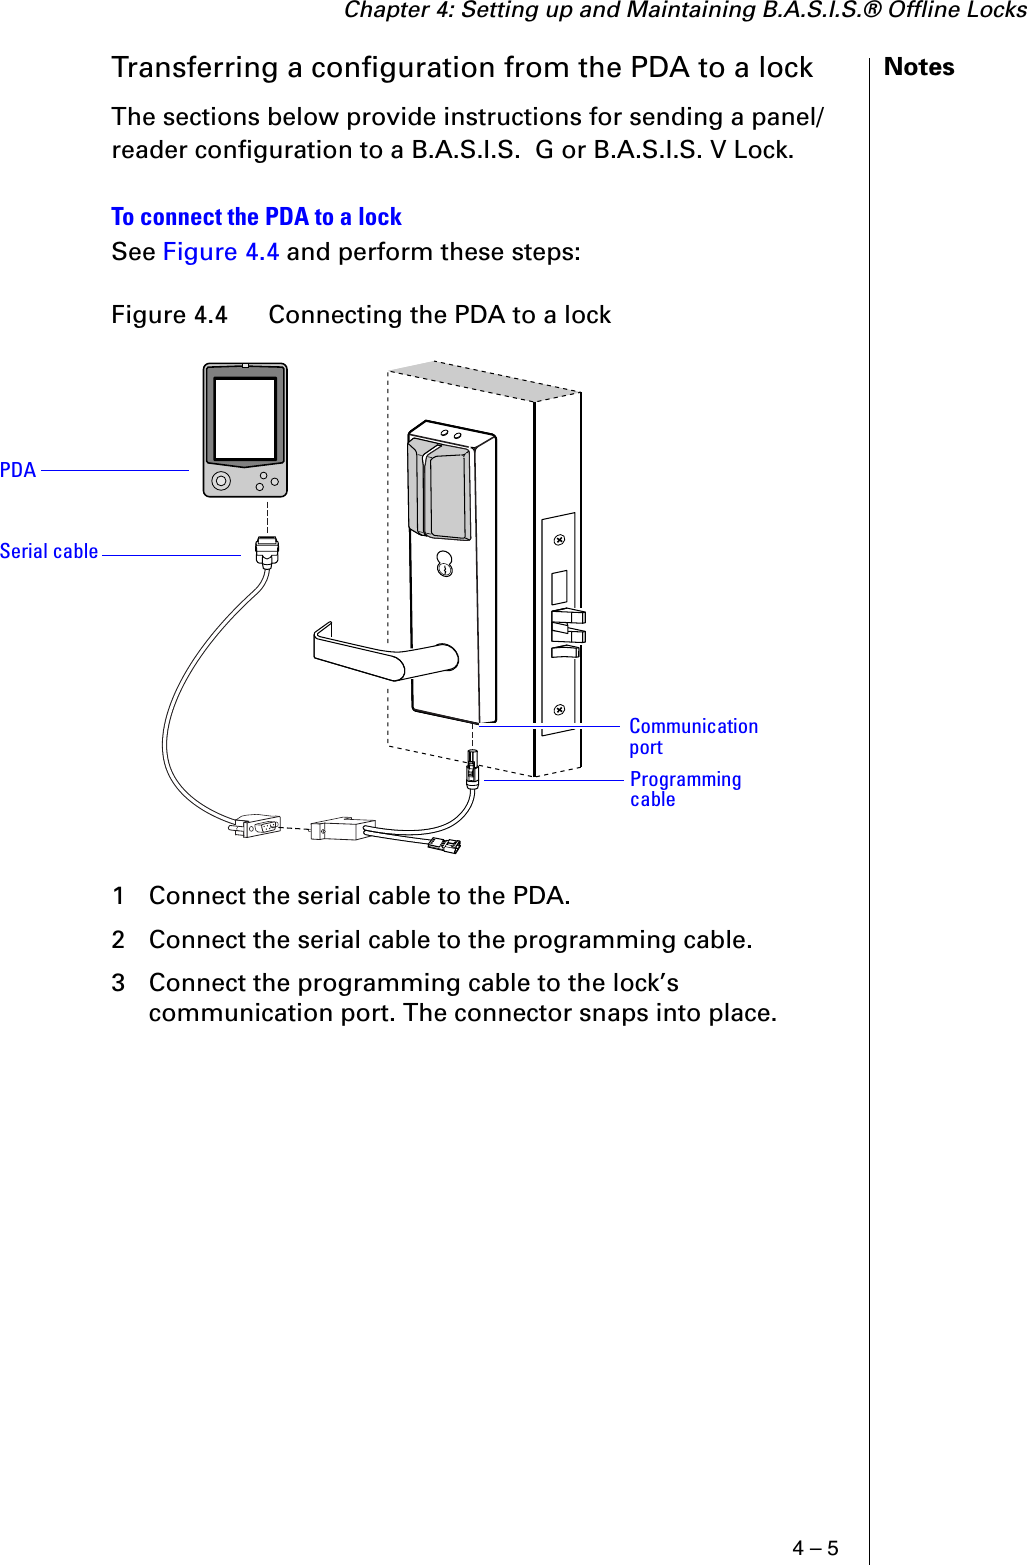 Chapter 4: Setting up and Maintaining B.A.S.I.S.® Offline Locks4 – 5NotesTransferring a configuration from the PDA to a lockThe sections below provide instructions for sending a panel/reader configuration to a B.A.S.I.S.  G or B.A.S.I.S. V Lock.To connect the PDA to a lockSee Figure 4.4 and perform these steps:1 Connect the serial cable to the PDA.2 Connect the serial cable to the programming cable.3 Connect the programming cable to the lock’s communication port. The connector snaps into place.Figure 4.4  Connecting the PDA to a lockPDASerial cableProgramming cableCommunication port